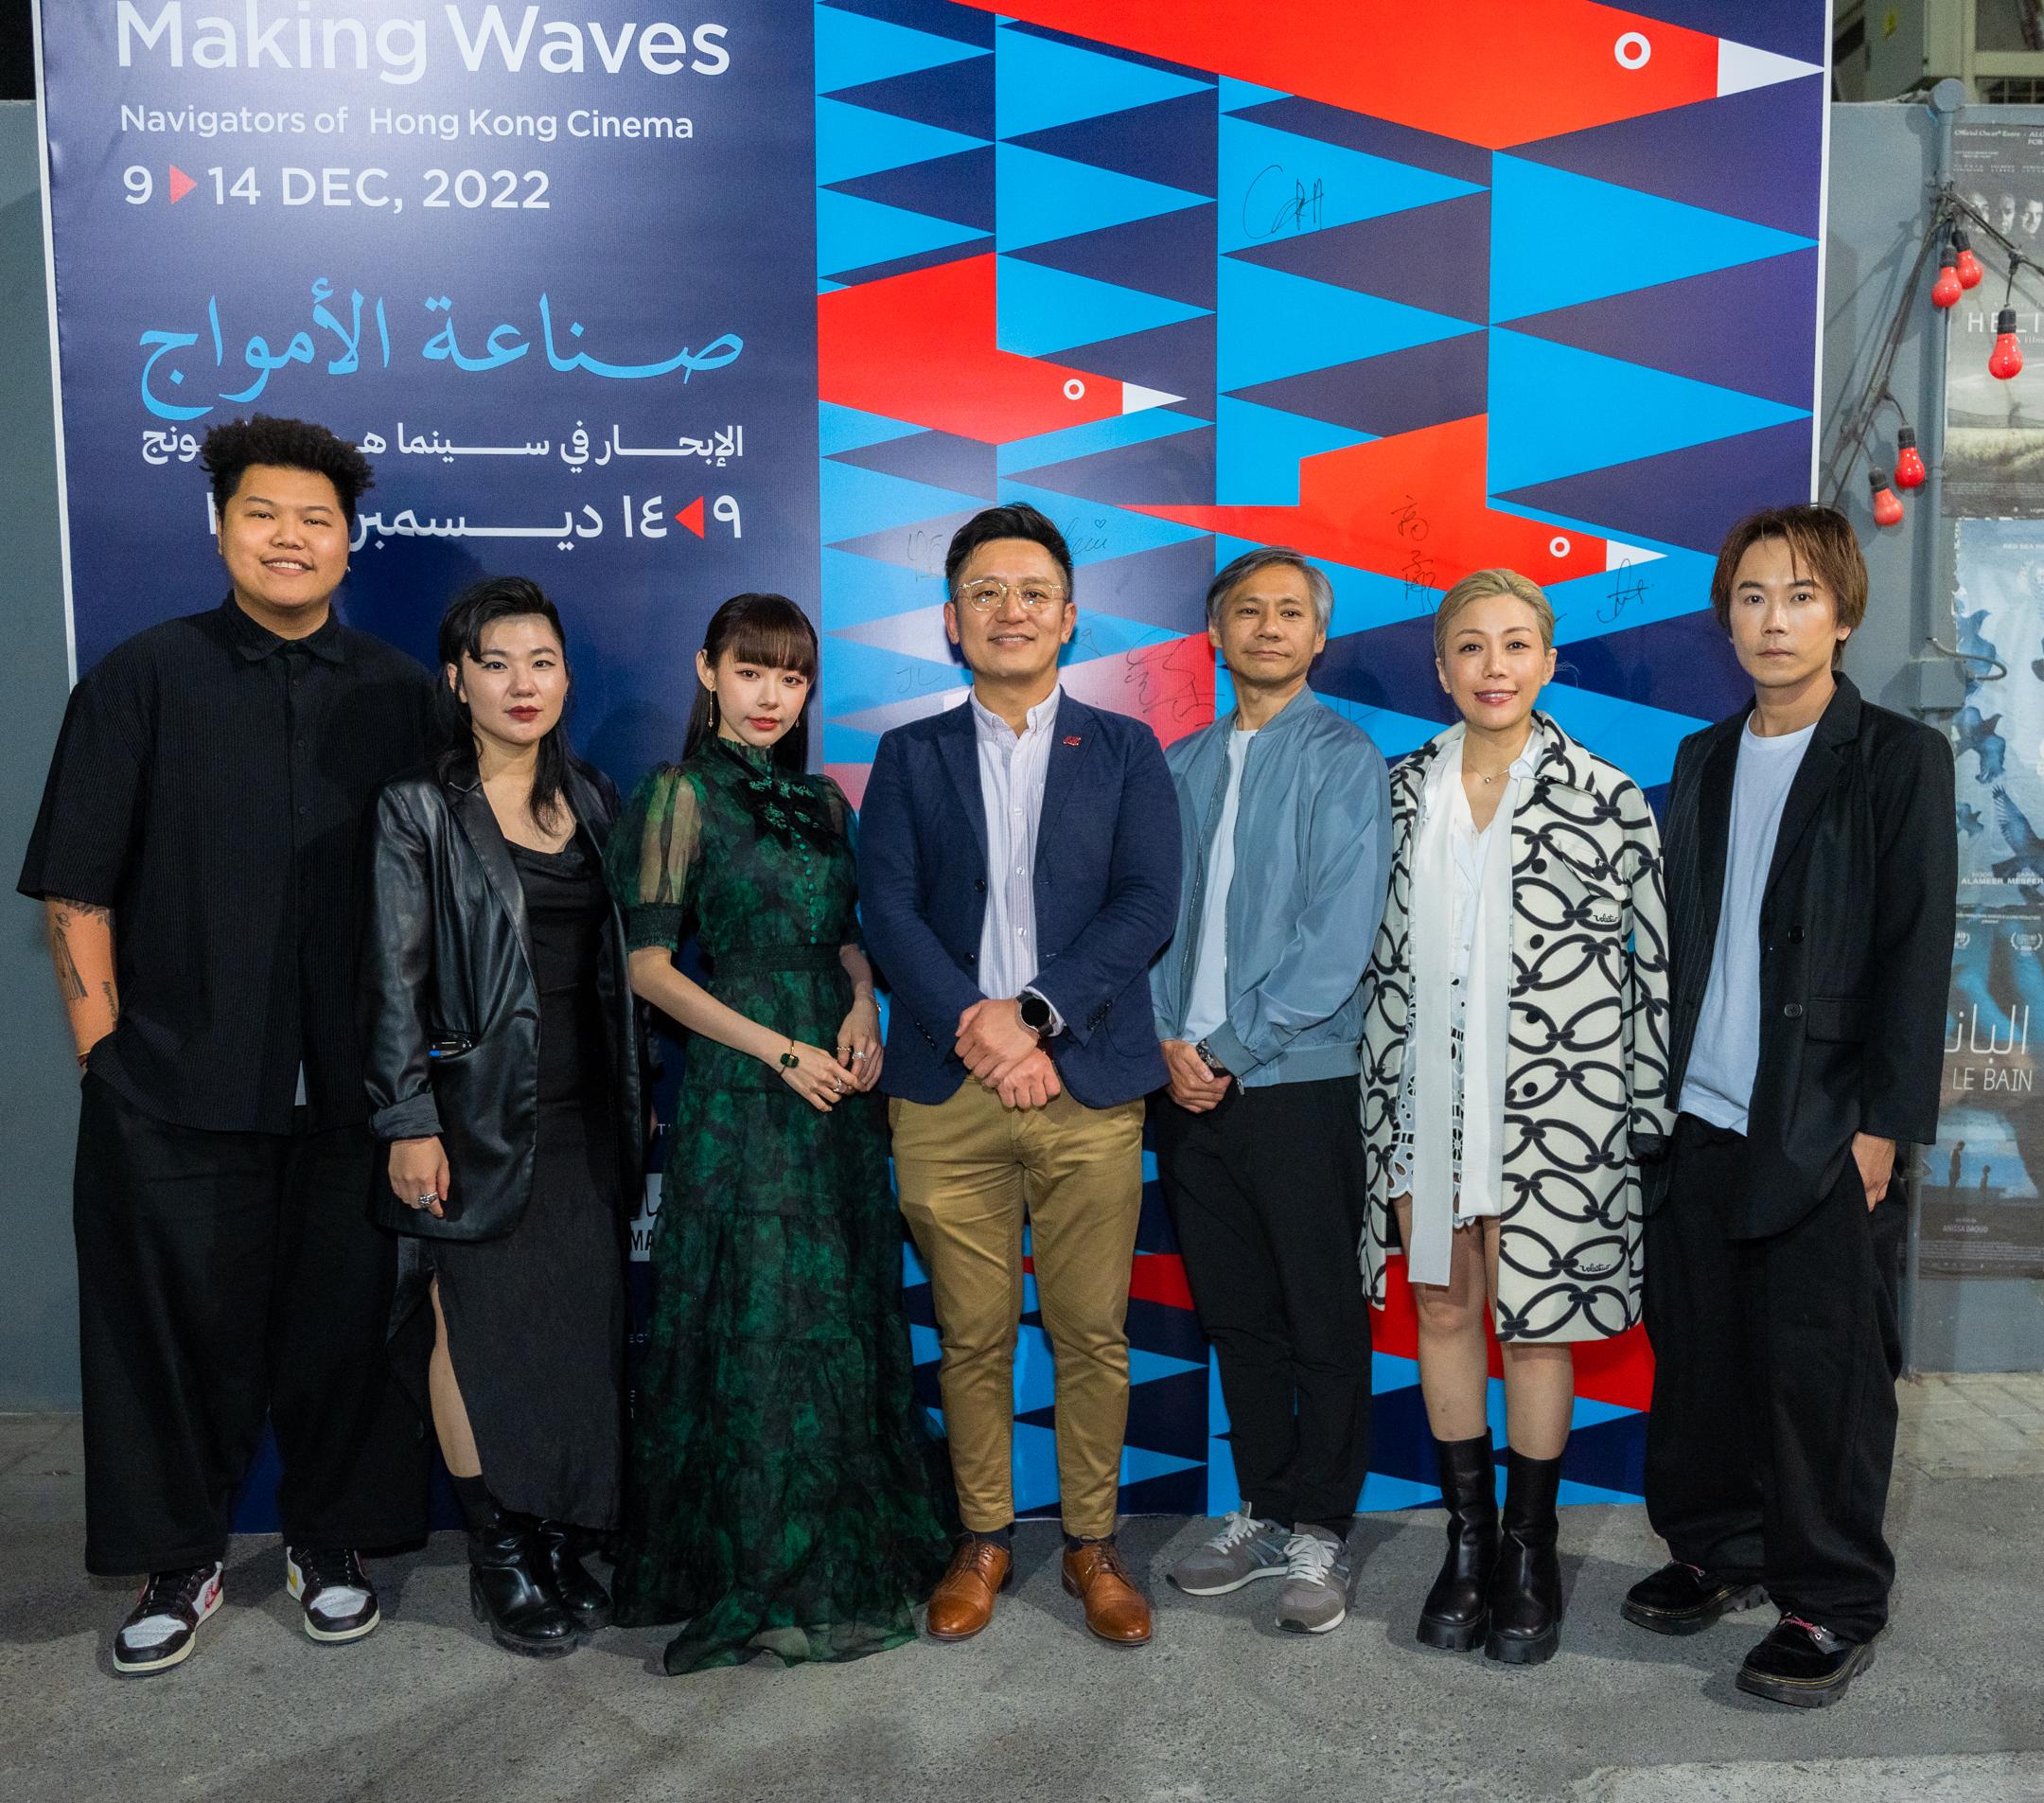 With the support of the Hong Kong Economic and Trade Office in Dubai (Dubai ETO), the "Making Waves - Navigators of Hong Kong Cinema" film programme completed its 15th and final stop successfully in Dubai from December 9 to 14 (Dubai time). The globe-trotting event, presented by Create Hong Kong in collaboration with the Hong Kong International Film Festival Society, celebrated the 25th anniversary of the establishment of the Hong Kong Special Administrative Region. Photo shows the Director-General of the Dubai ETO, Mr Damian Lee (fourth right), pictured with Hong Kong film directors Chiu Sin-hang (first right), Kearen Pang (second right), Ricky Ko (third right) and Coba Cheng (first left), with actress Lin Min-chen (third left), as well as Hong Kong unit photographer Quist Tsang (second left) before the opening film screening.